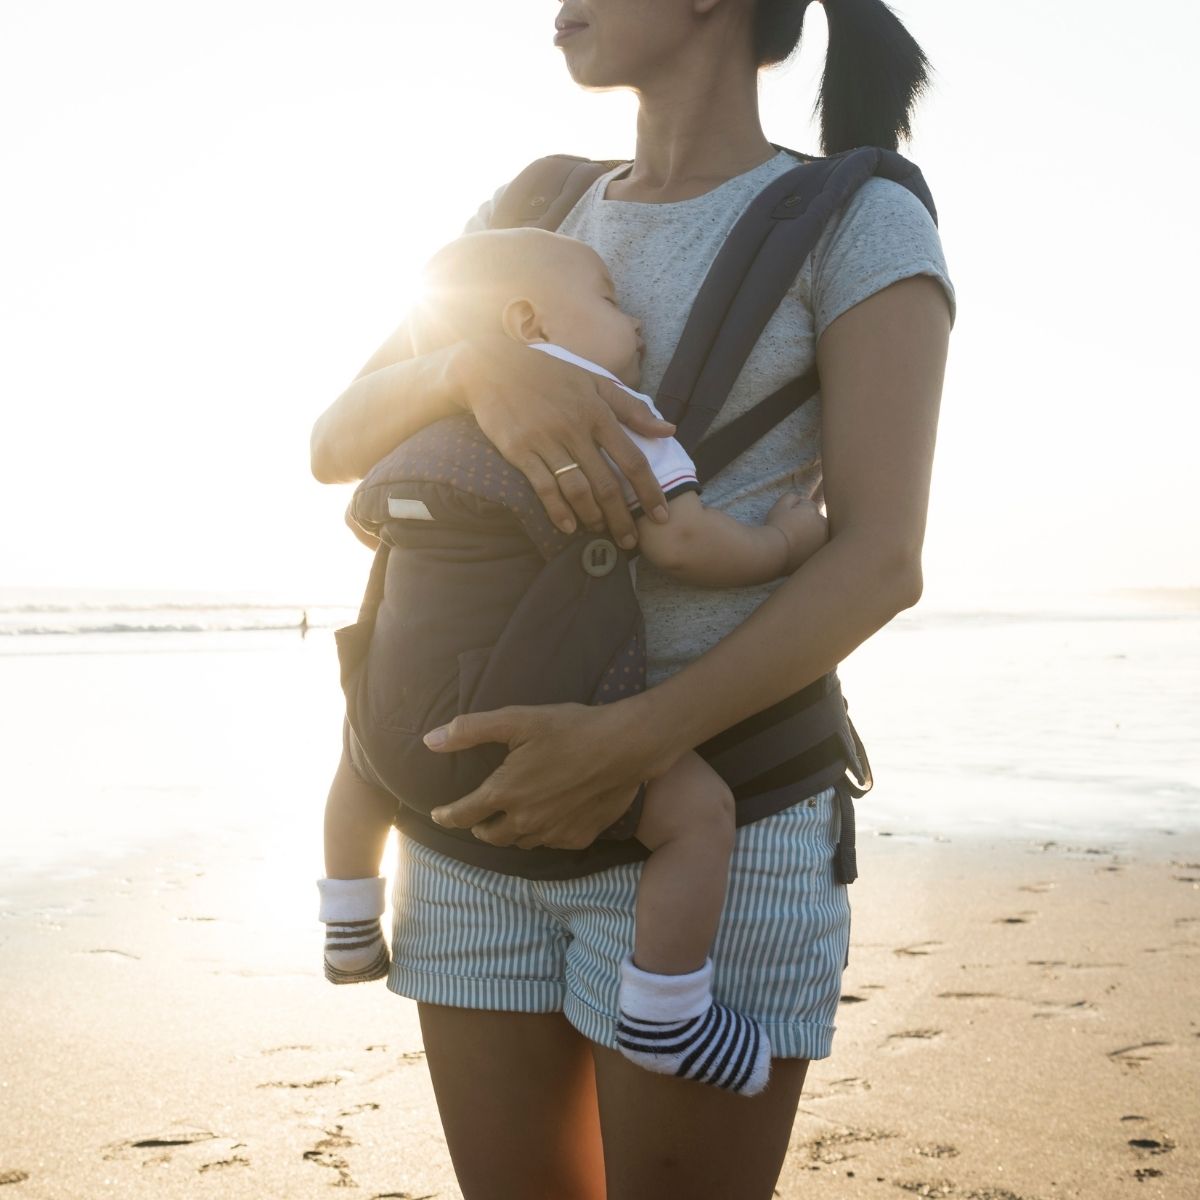 Mom with a baby in a carrier on the beach